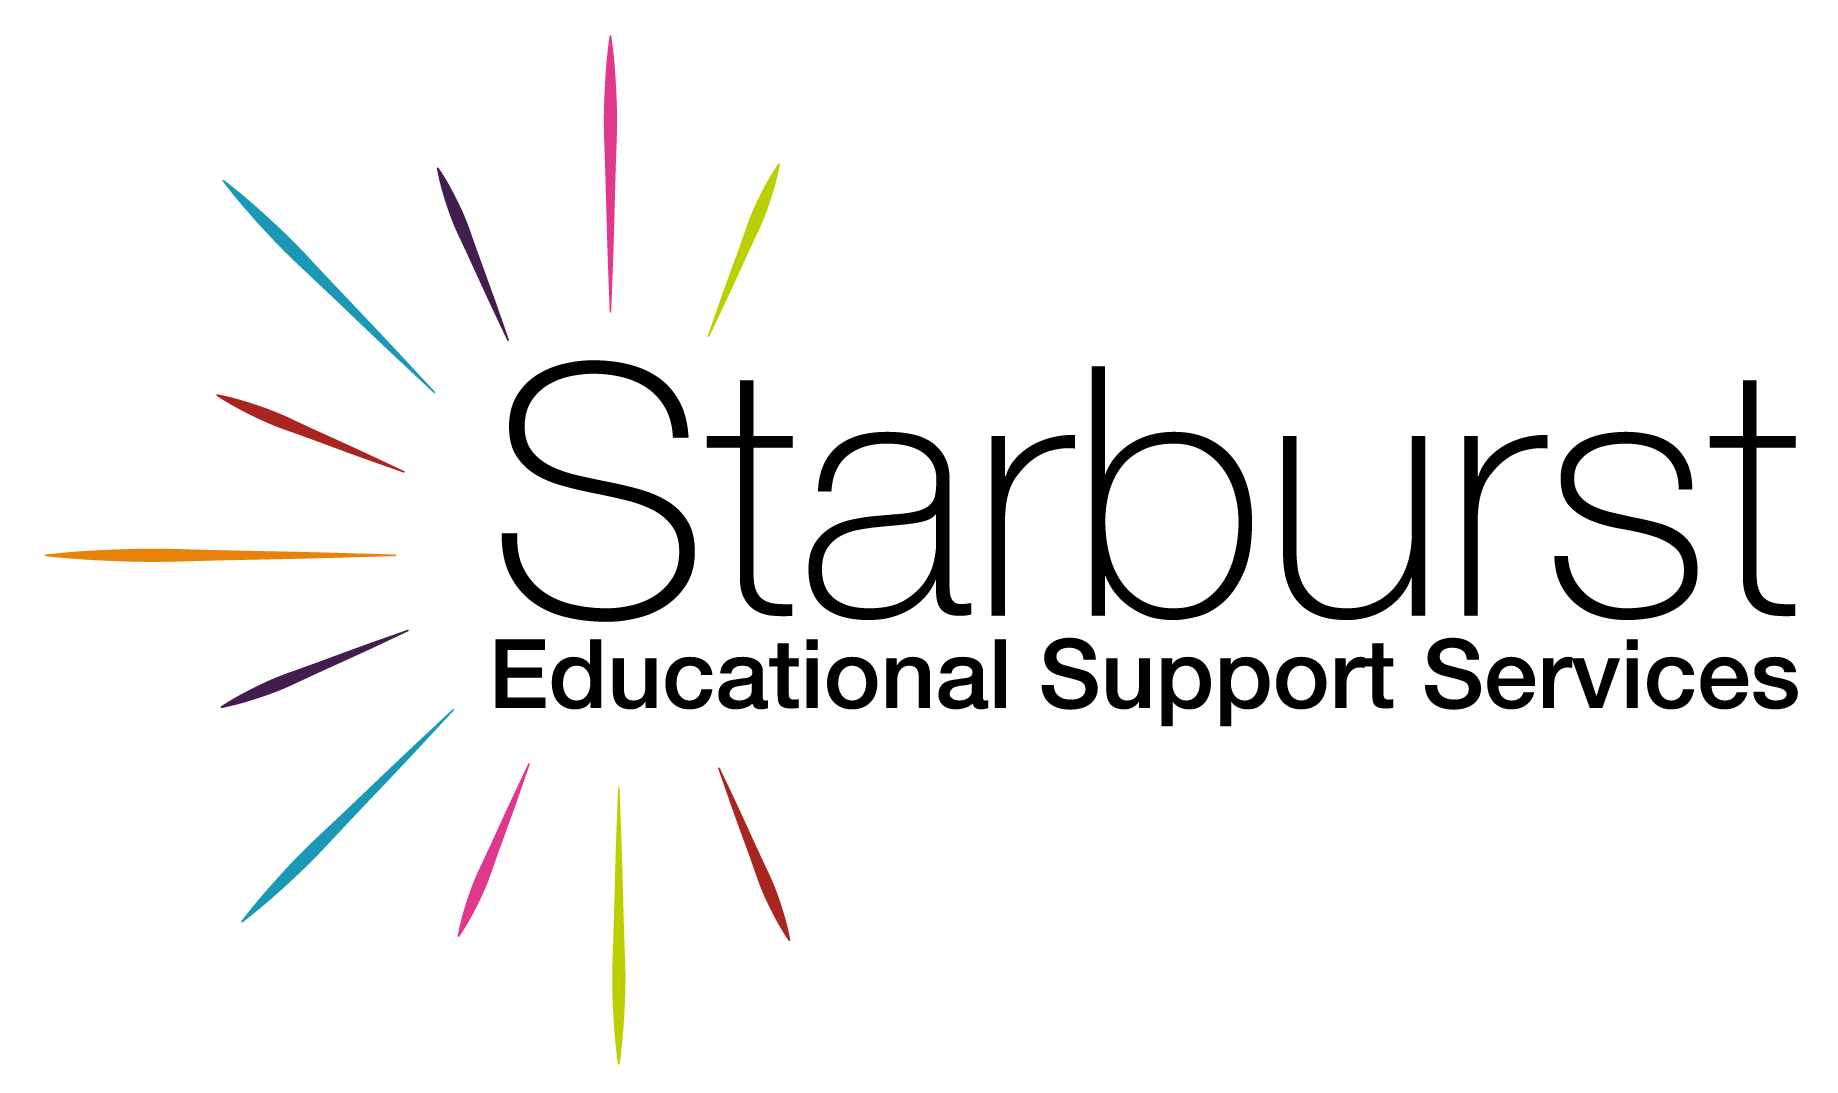 Starburst Educational Support Services